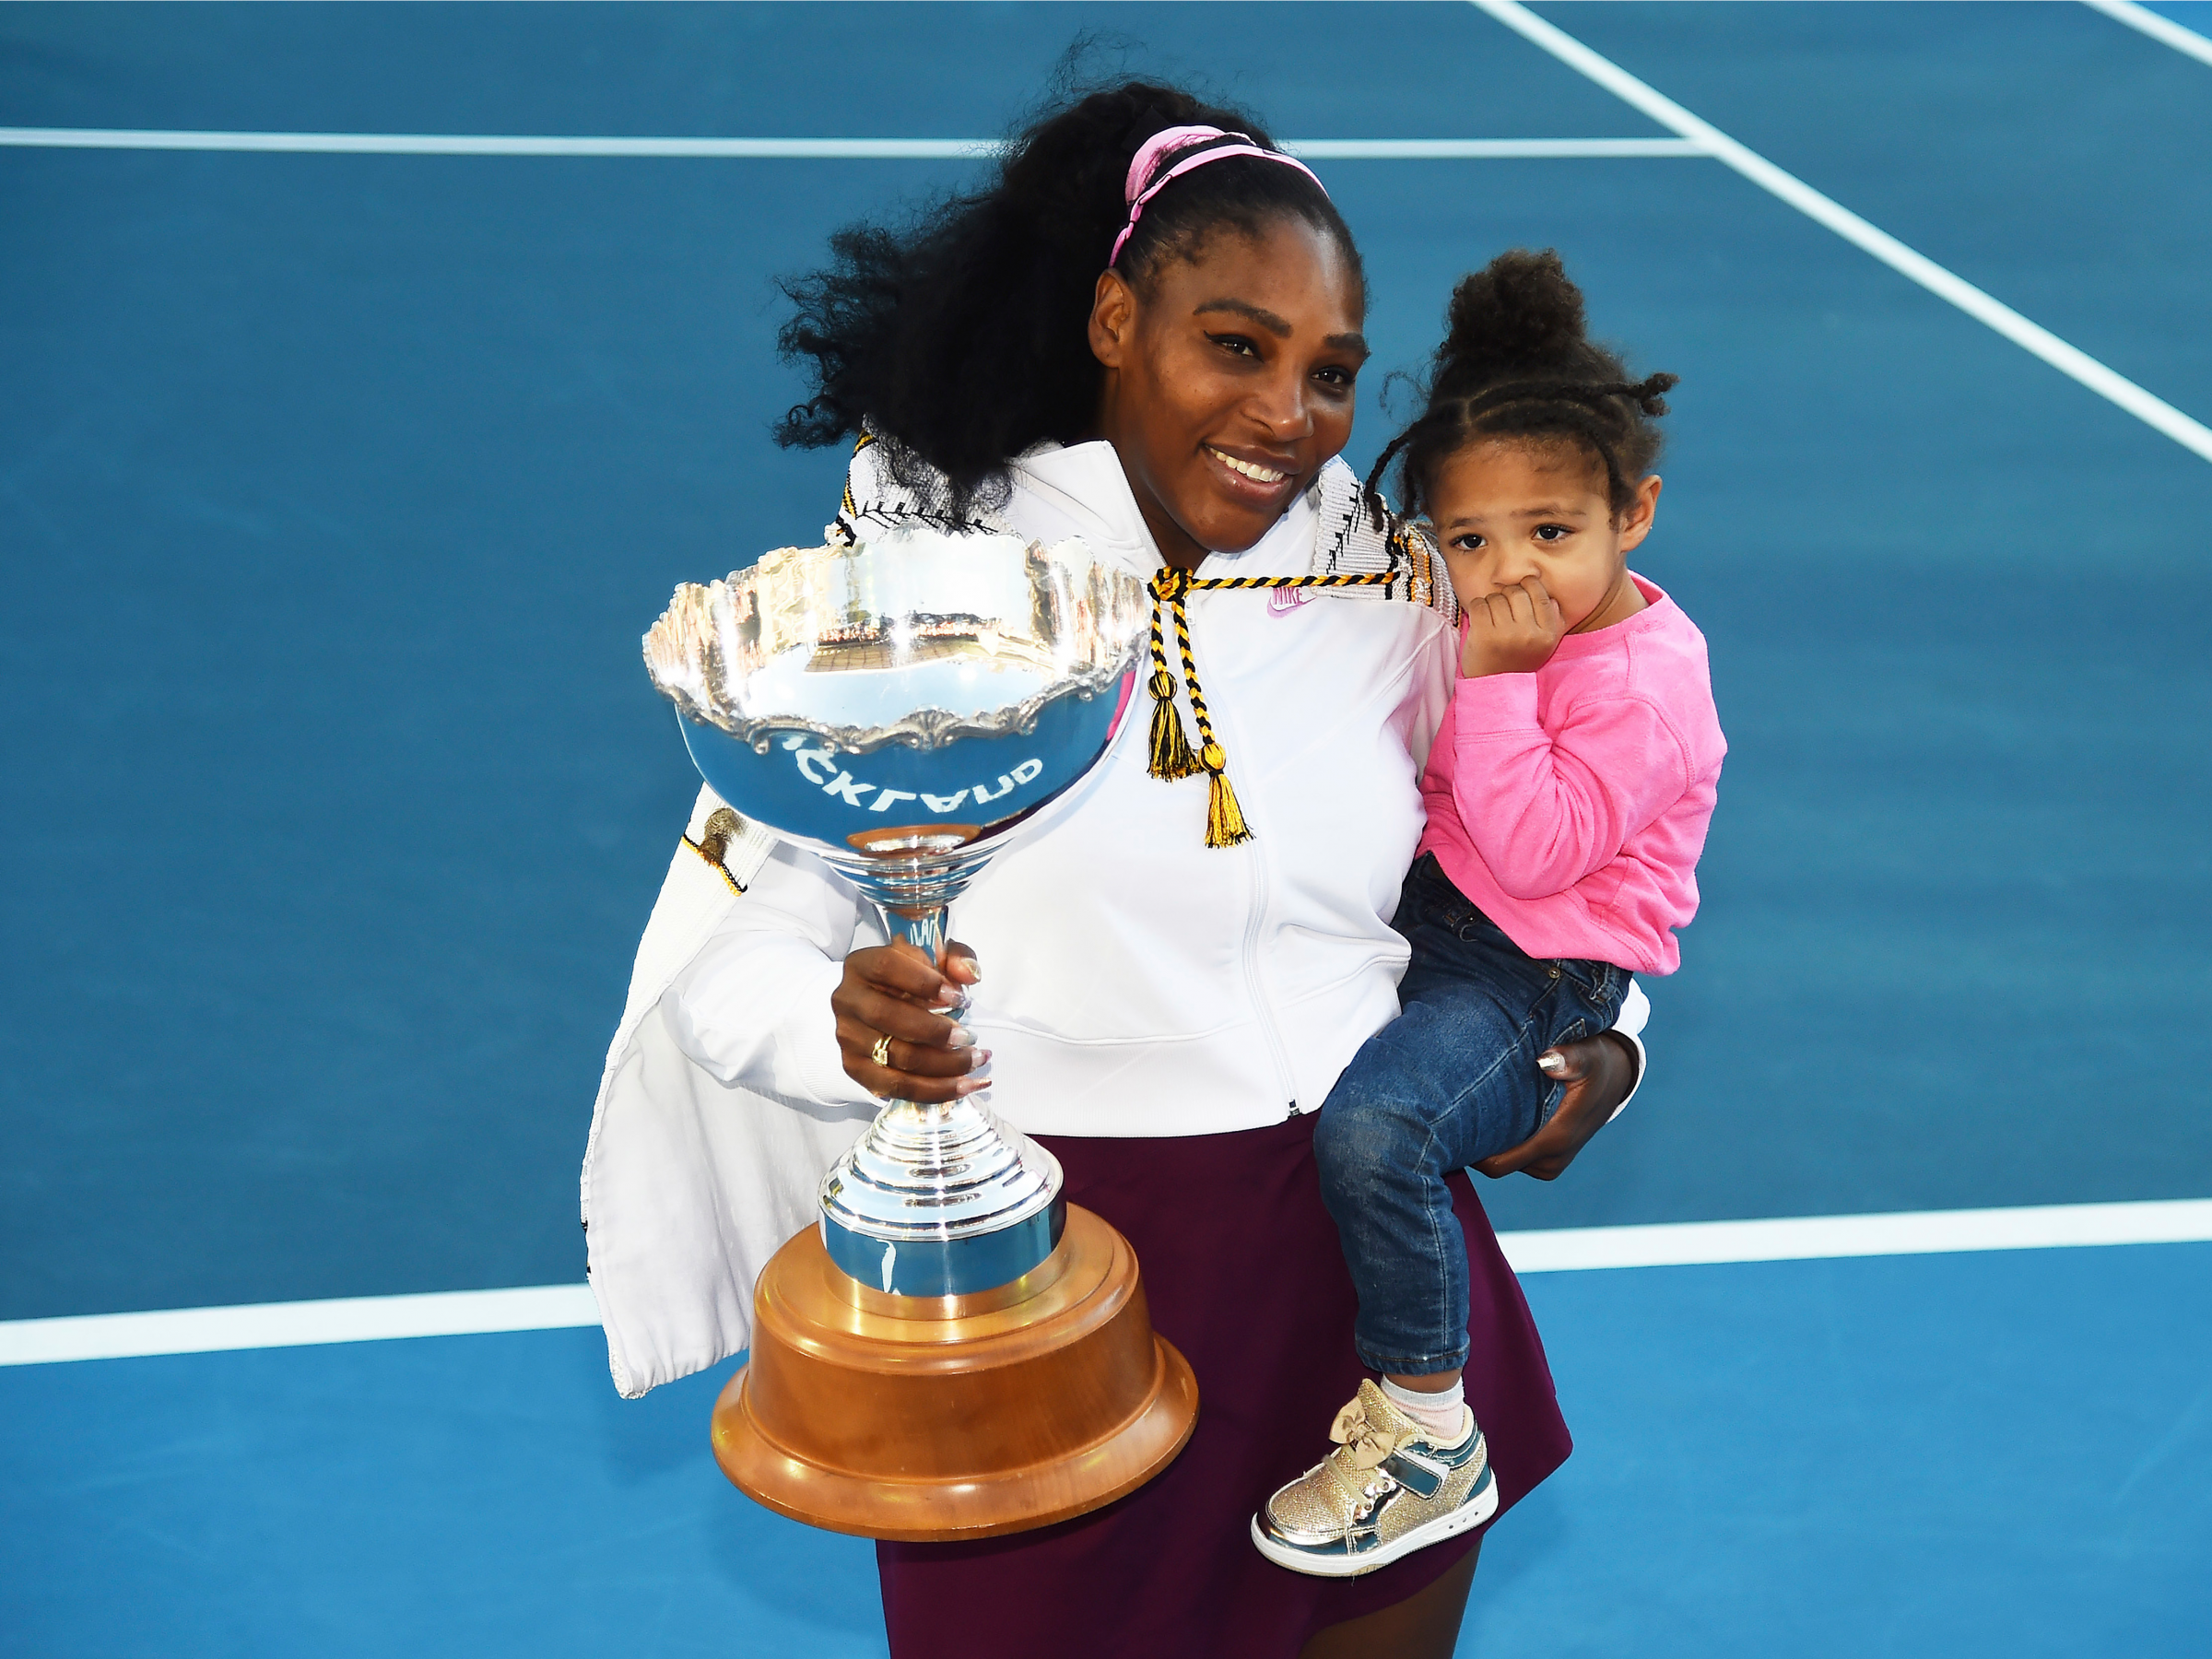 Serena and her daughter Olympia